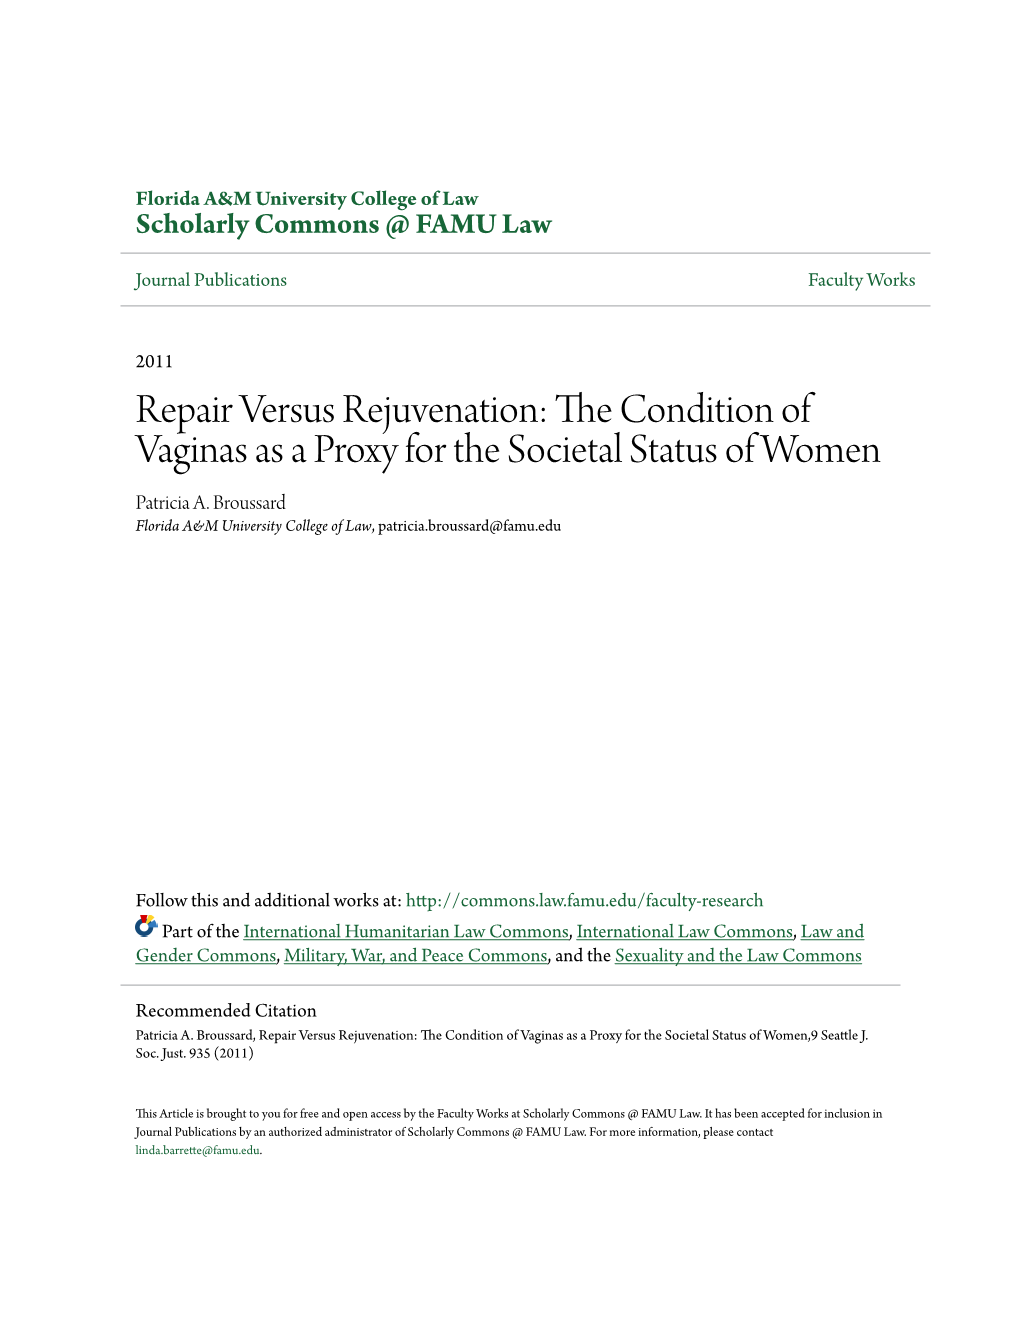 Repair Versus Rejuvenation: the Condition of Vaginas As a Proxy for the Societal Status of Women